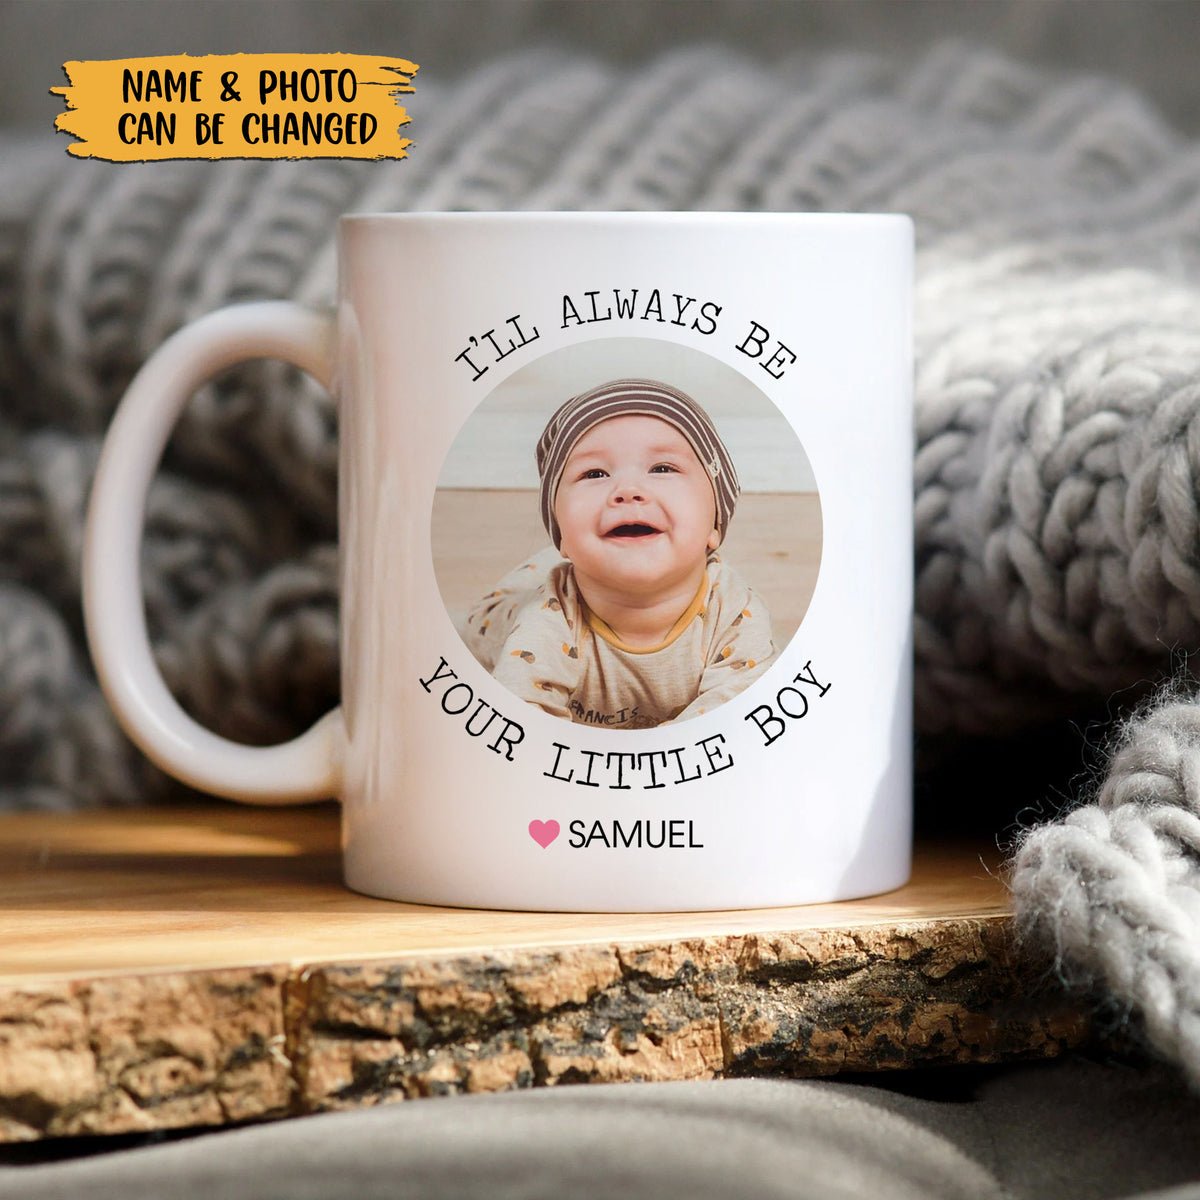 I'll Always Be Your Little Boy/Girl Cute Baby Photo - Personalized White Mug - Best Gift For Mom/Dad